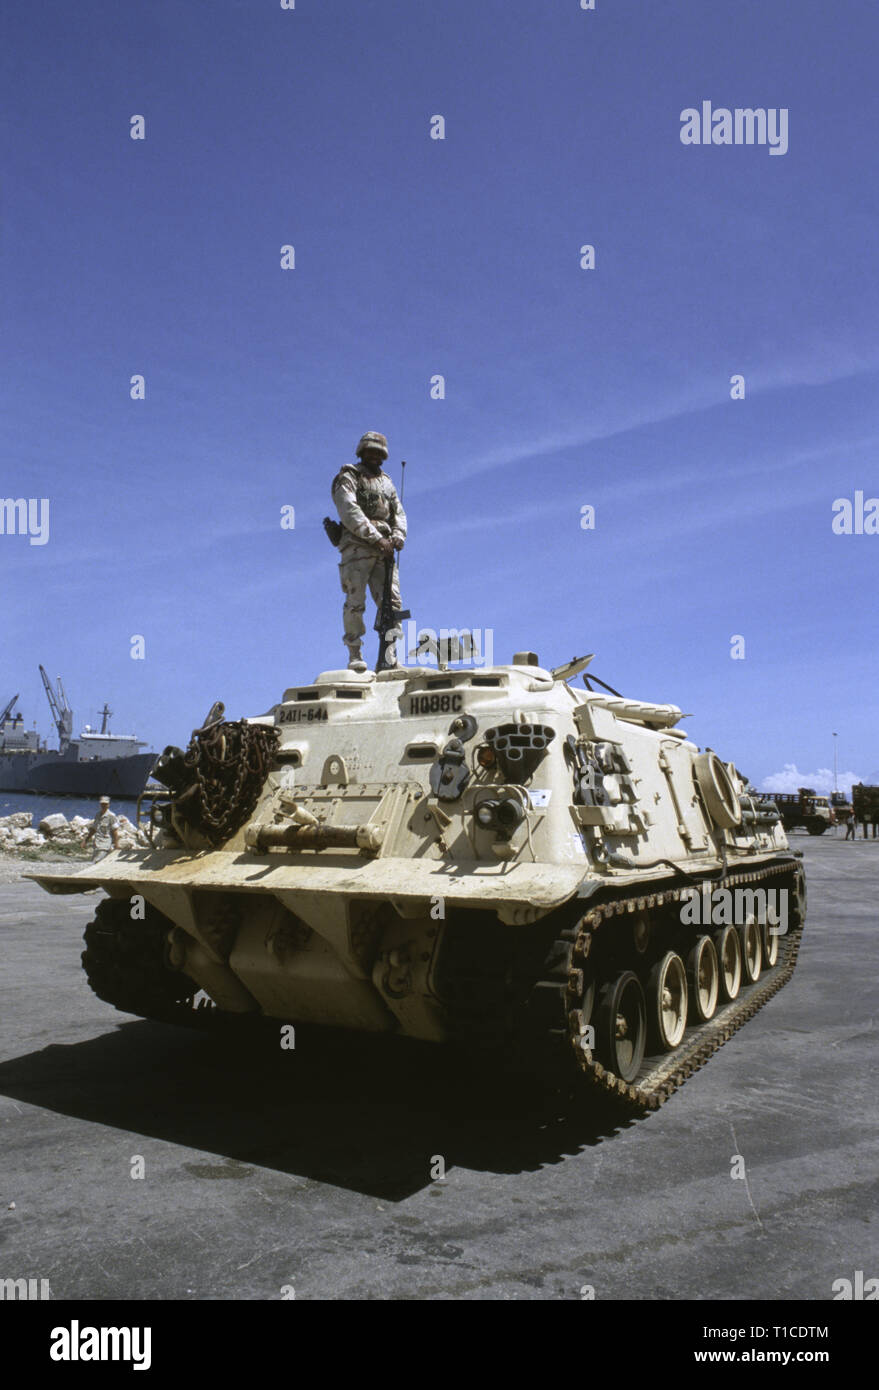 29th October 1993 A U.S. Army soldier of the 24th Infantry Division, 1st Battalion of the 64th Armored Regiment, stands on top of his M88 recovery vehicle, in the port in Mogadishu, Somalia where it has just arrived by sea. Stock Photo